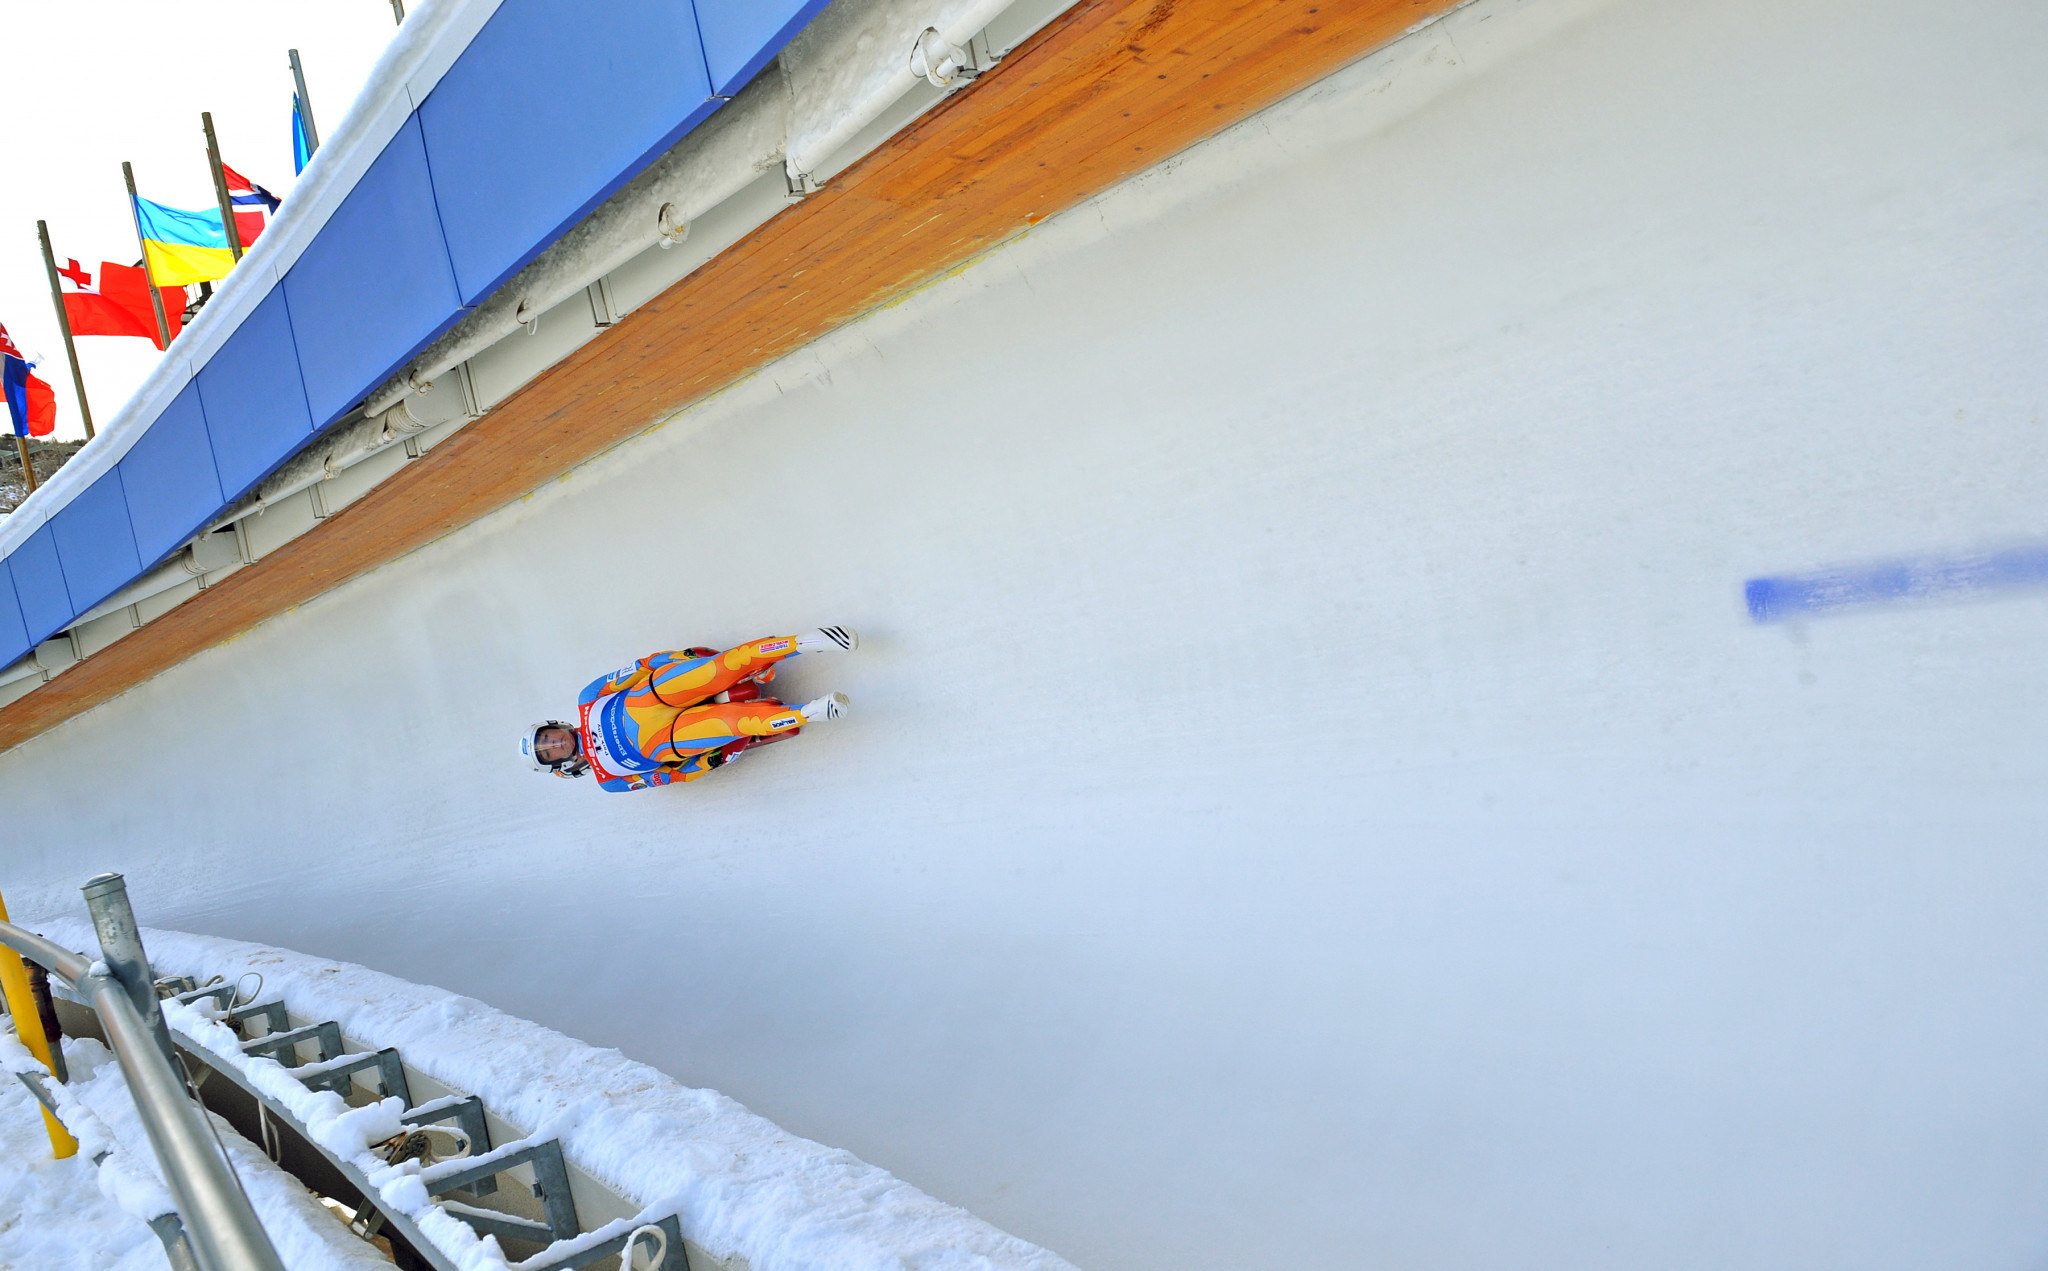 The deal will see the FIL help organise the 2022 Olympic luge events ©Getty Images